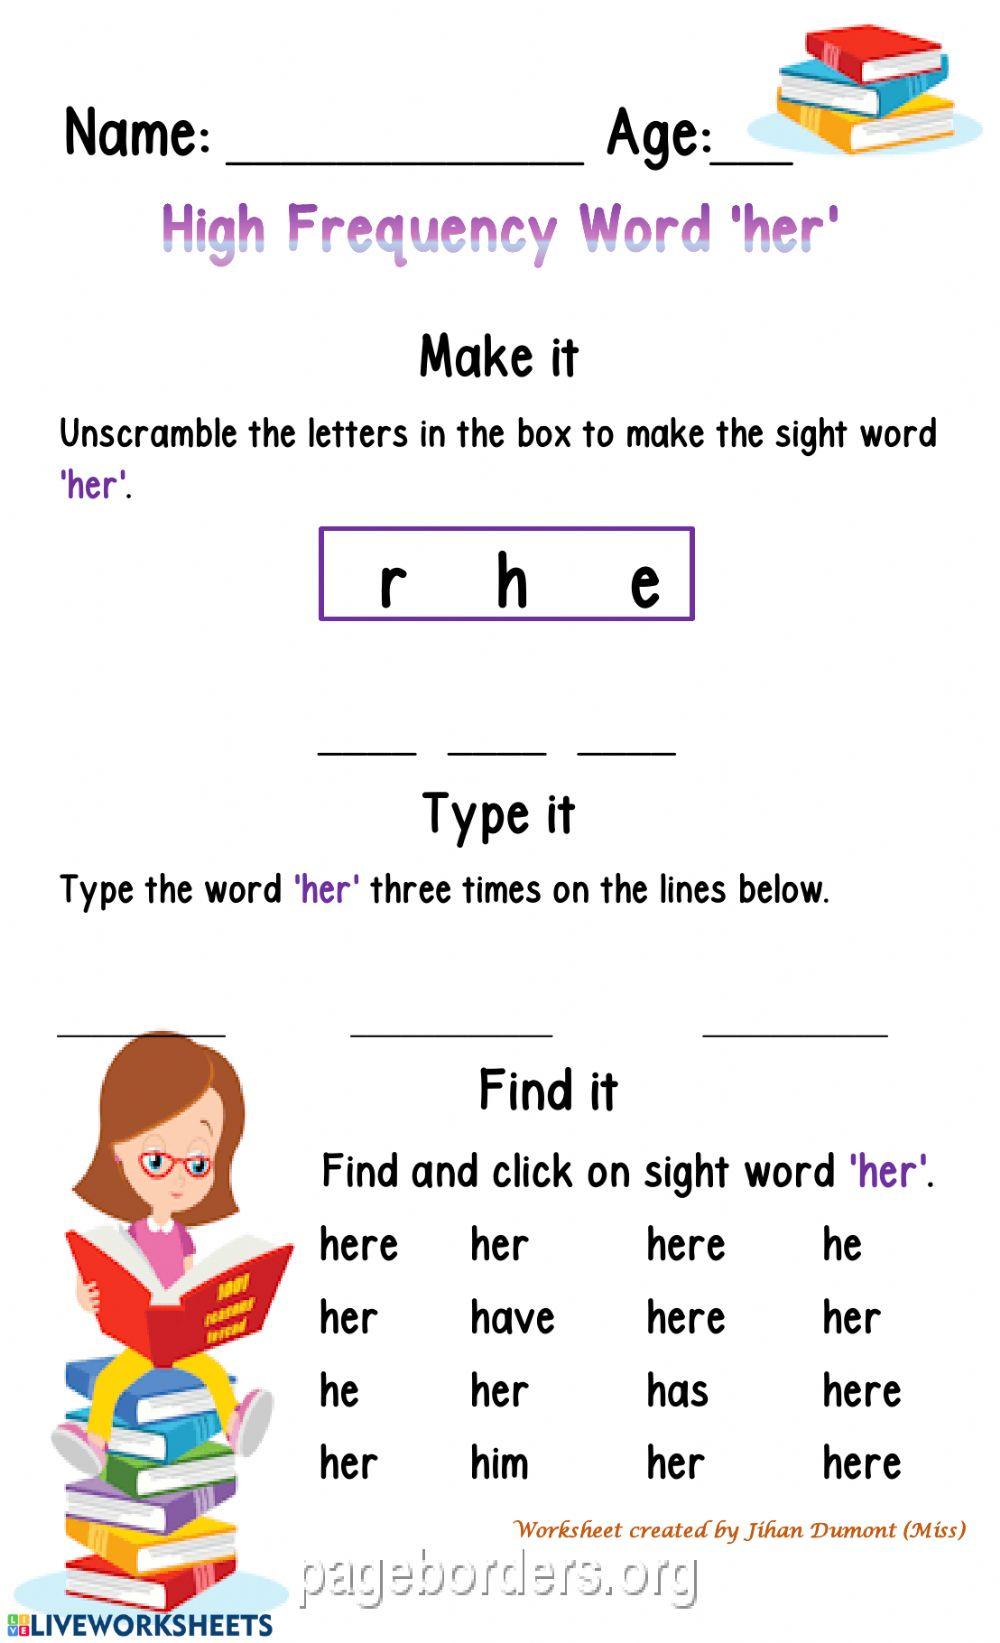 High Frequency Word 'her'